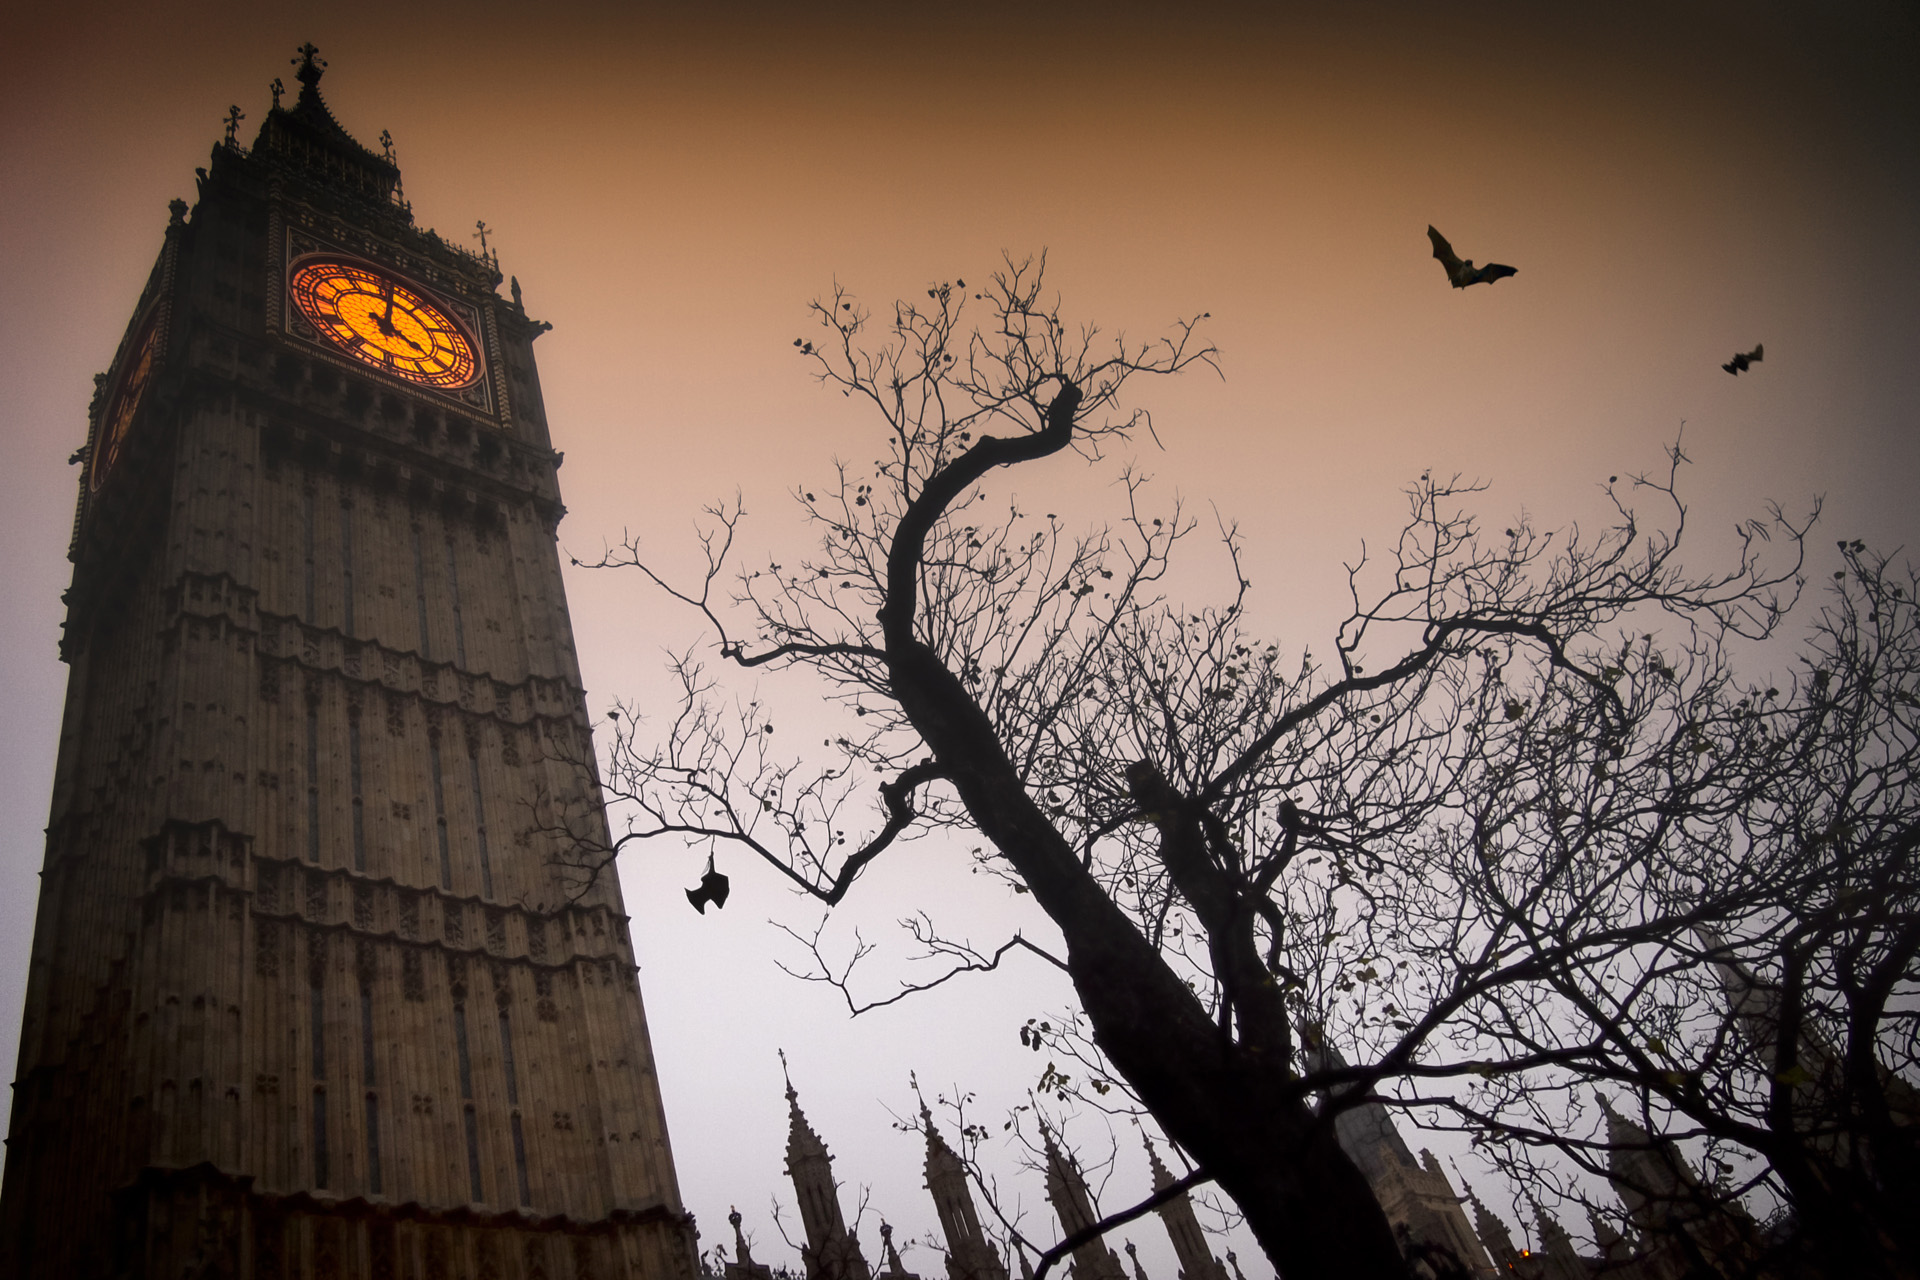 Halloween in London: The spooky clock tower of Westminster with a bare tree and flying bats